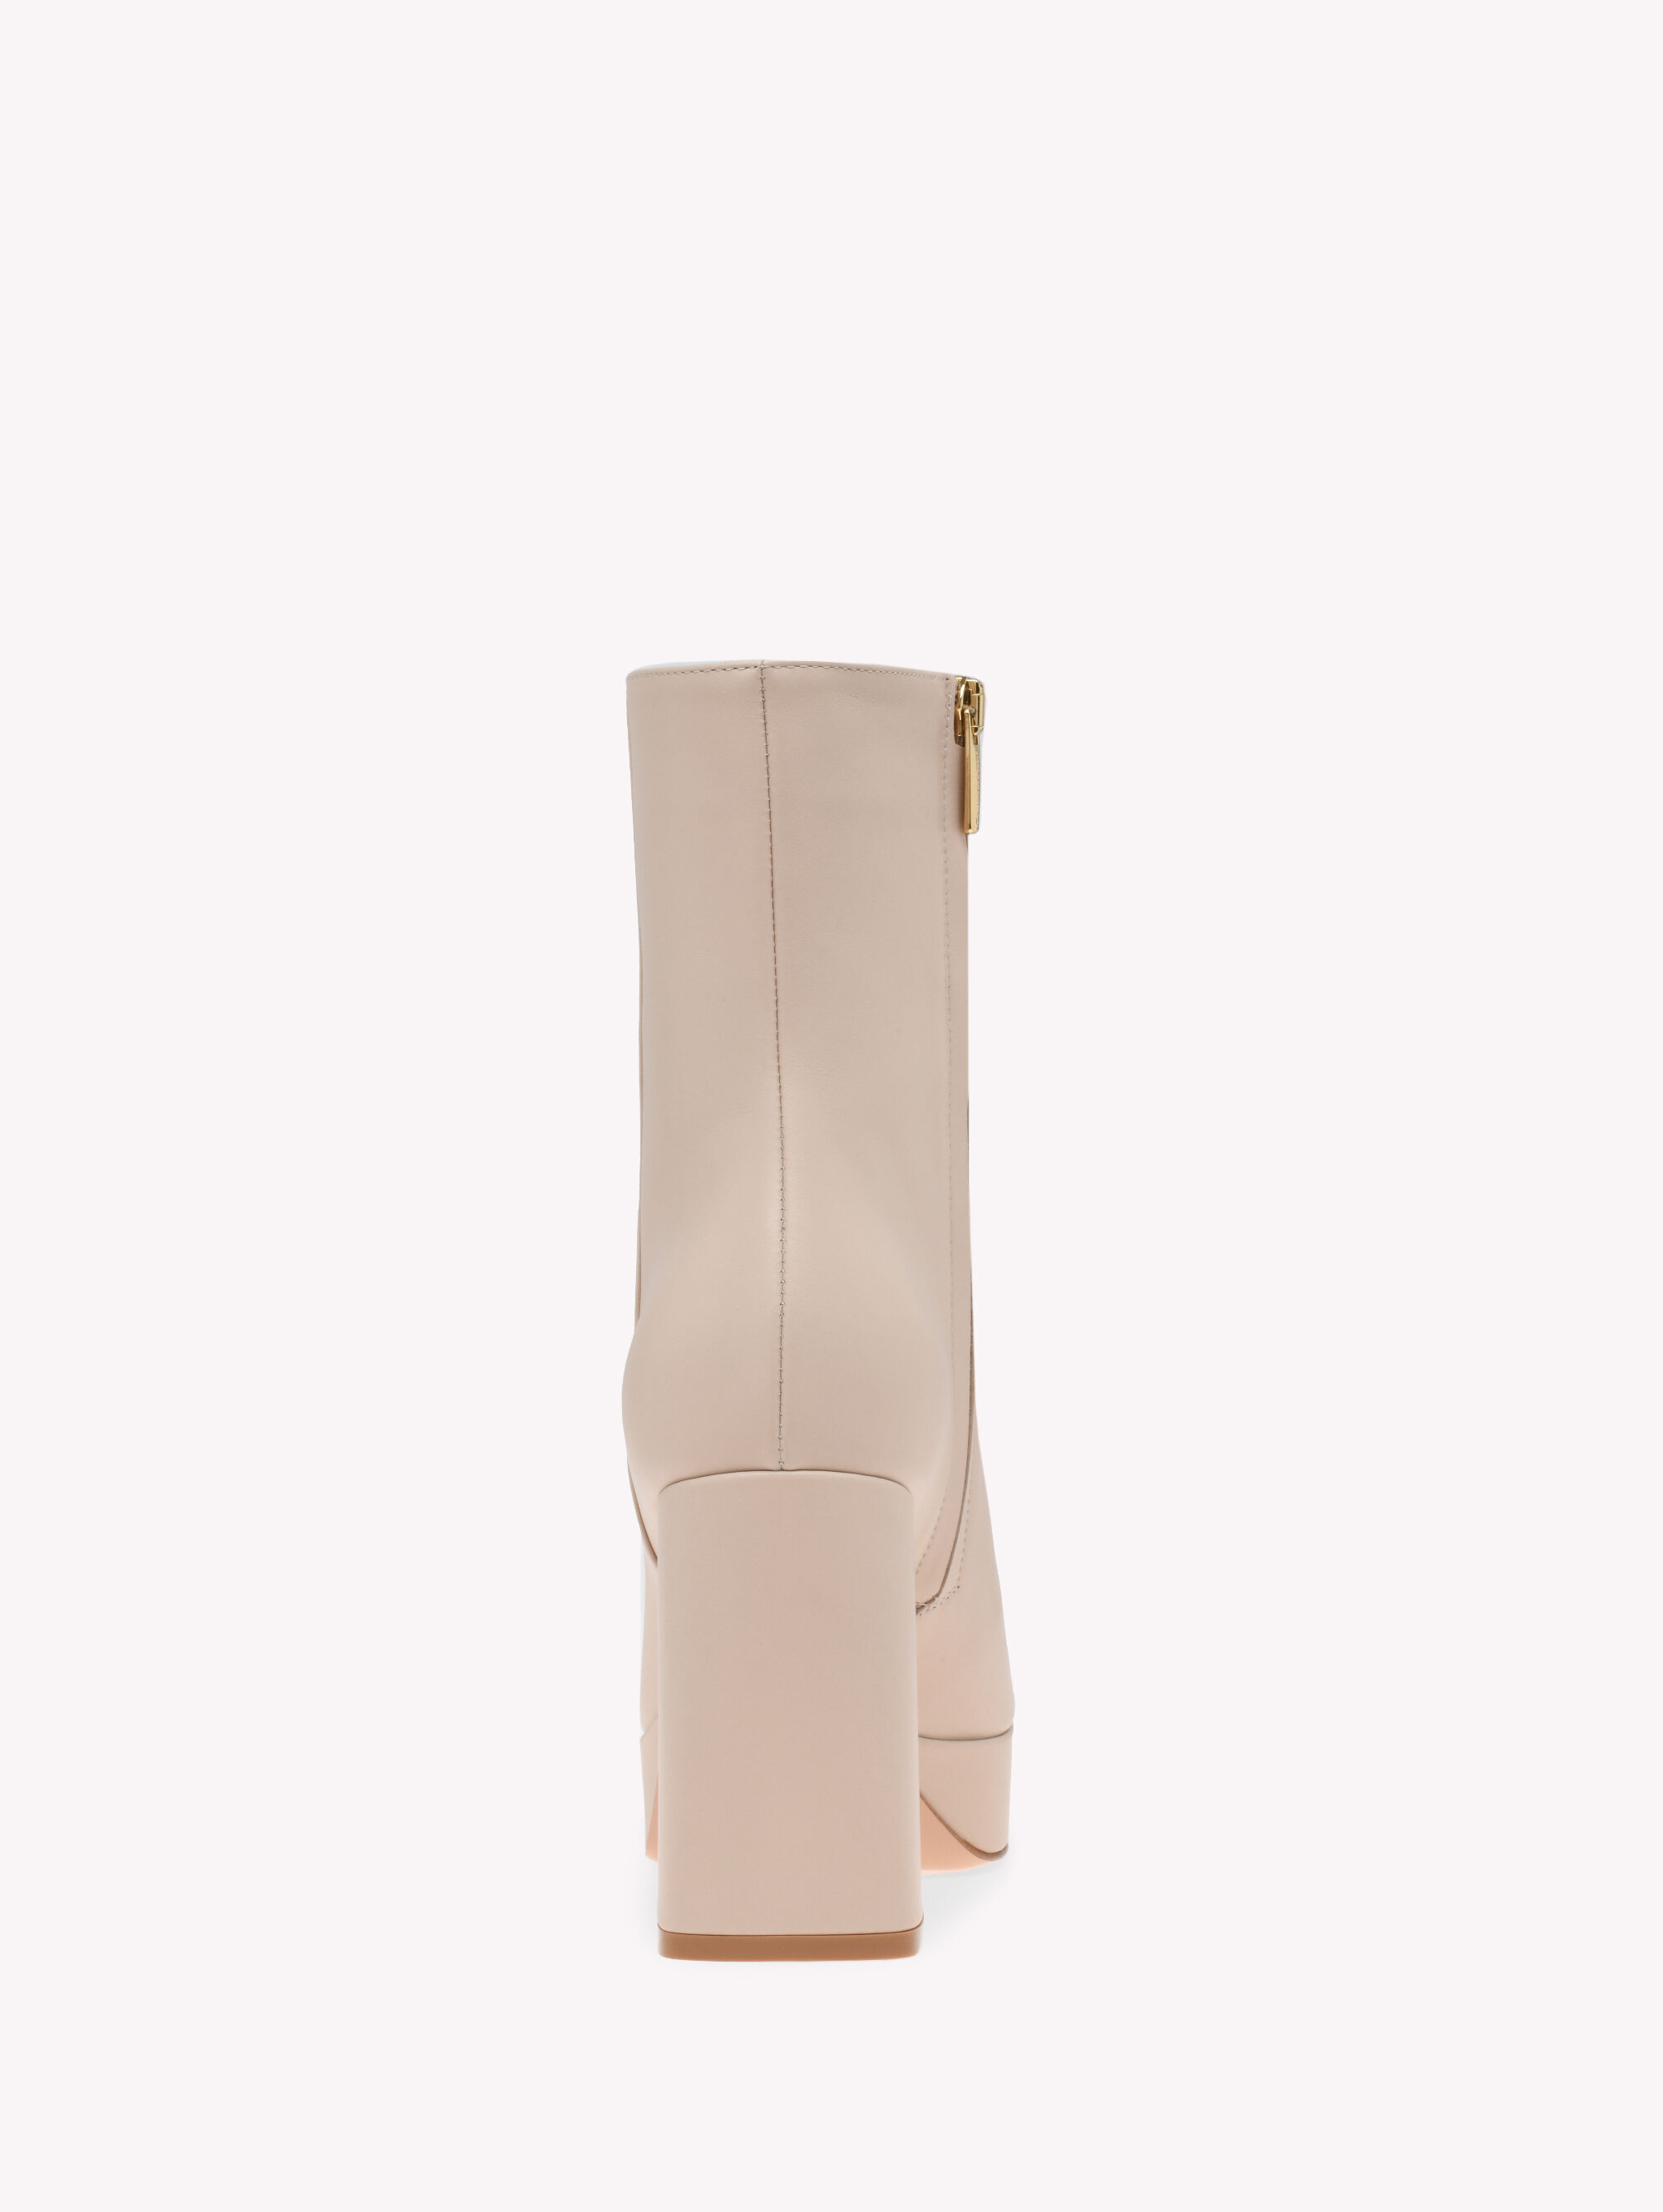 Ankle Boots for Women DAISEN | Gianvito Rossi